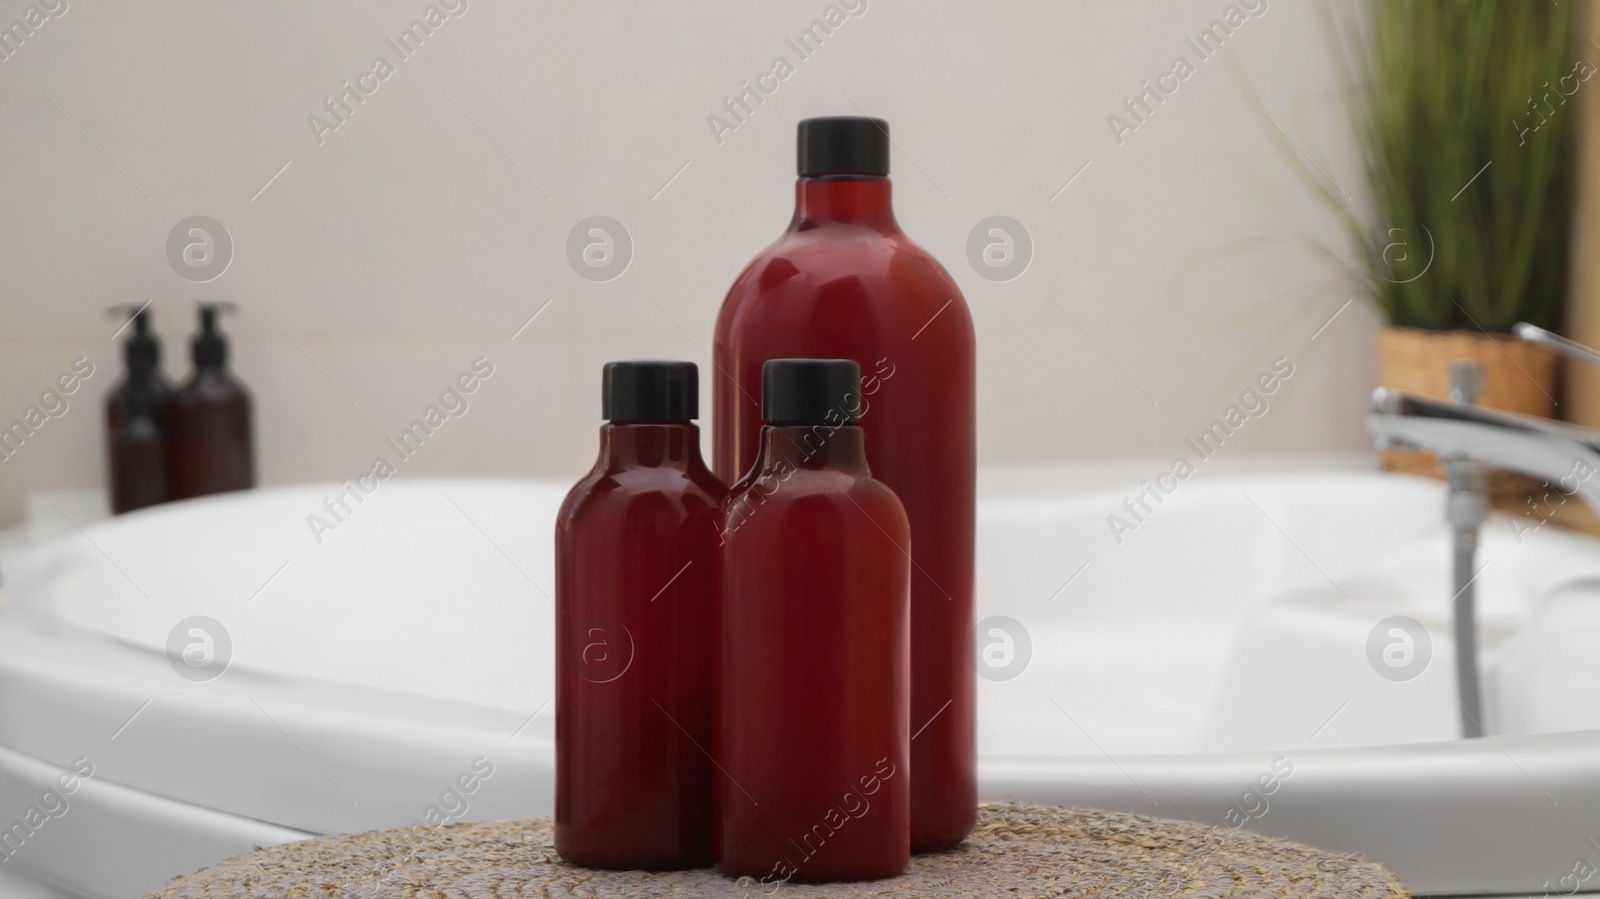 Photo of Bath foam and other personal hygiene products in bottles on wicker mat in bathroom